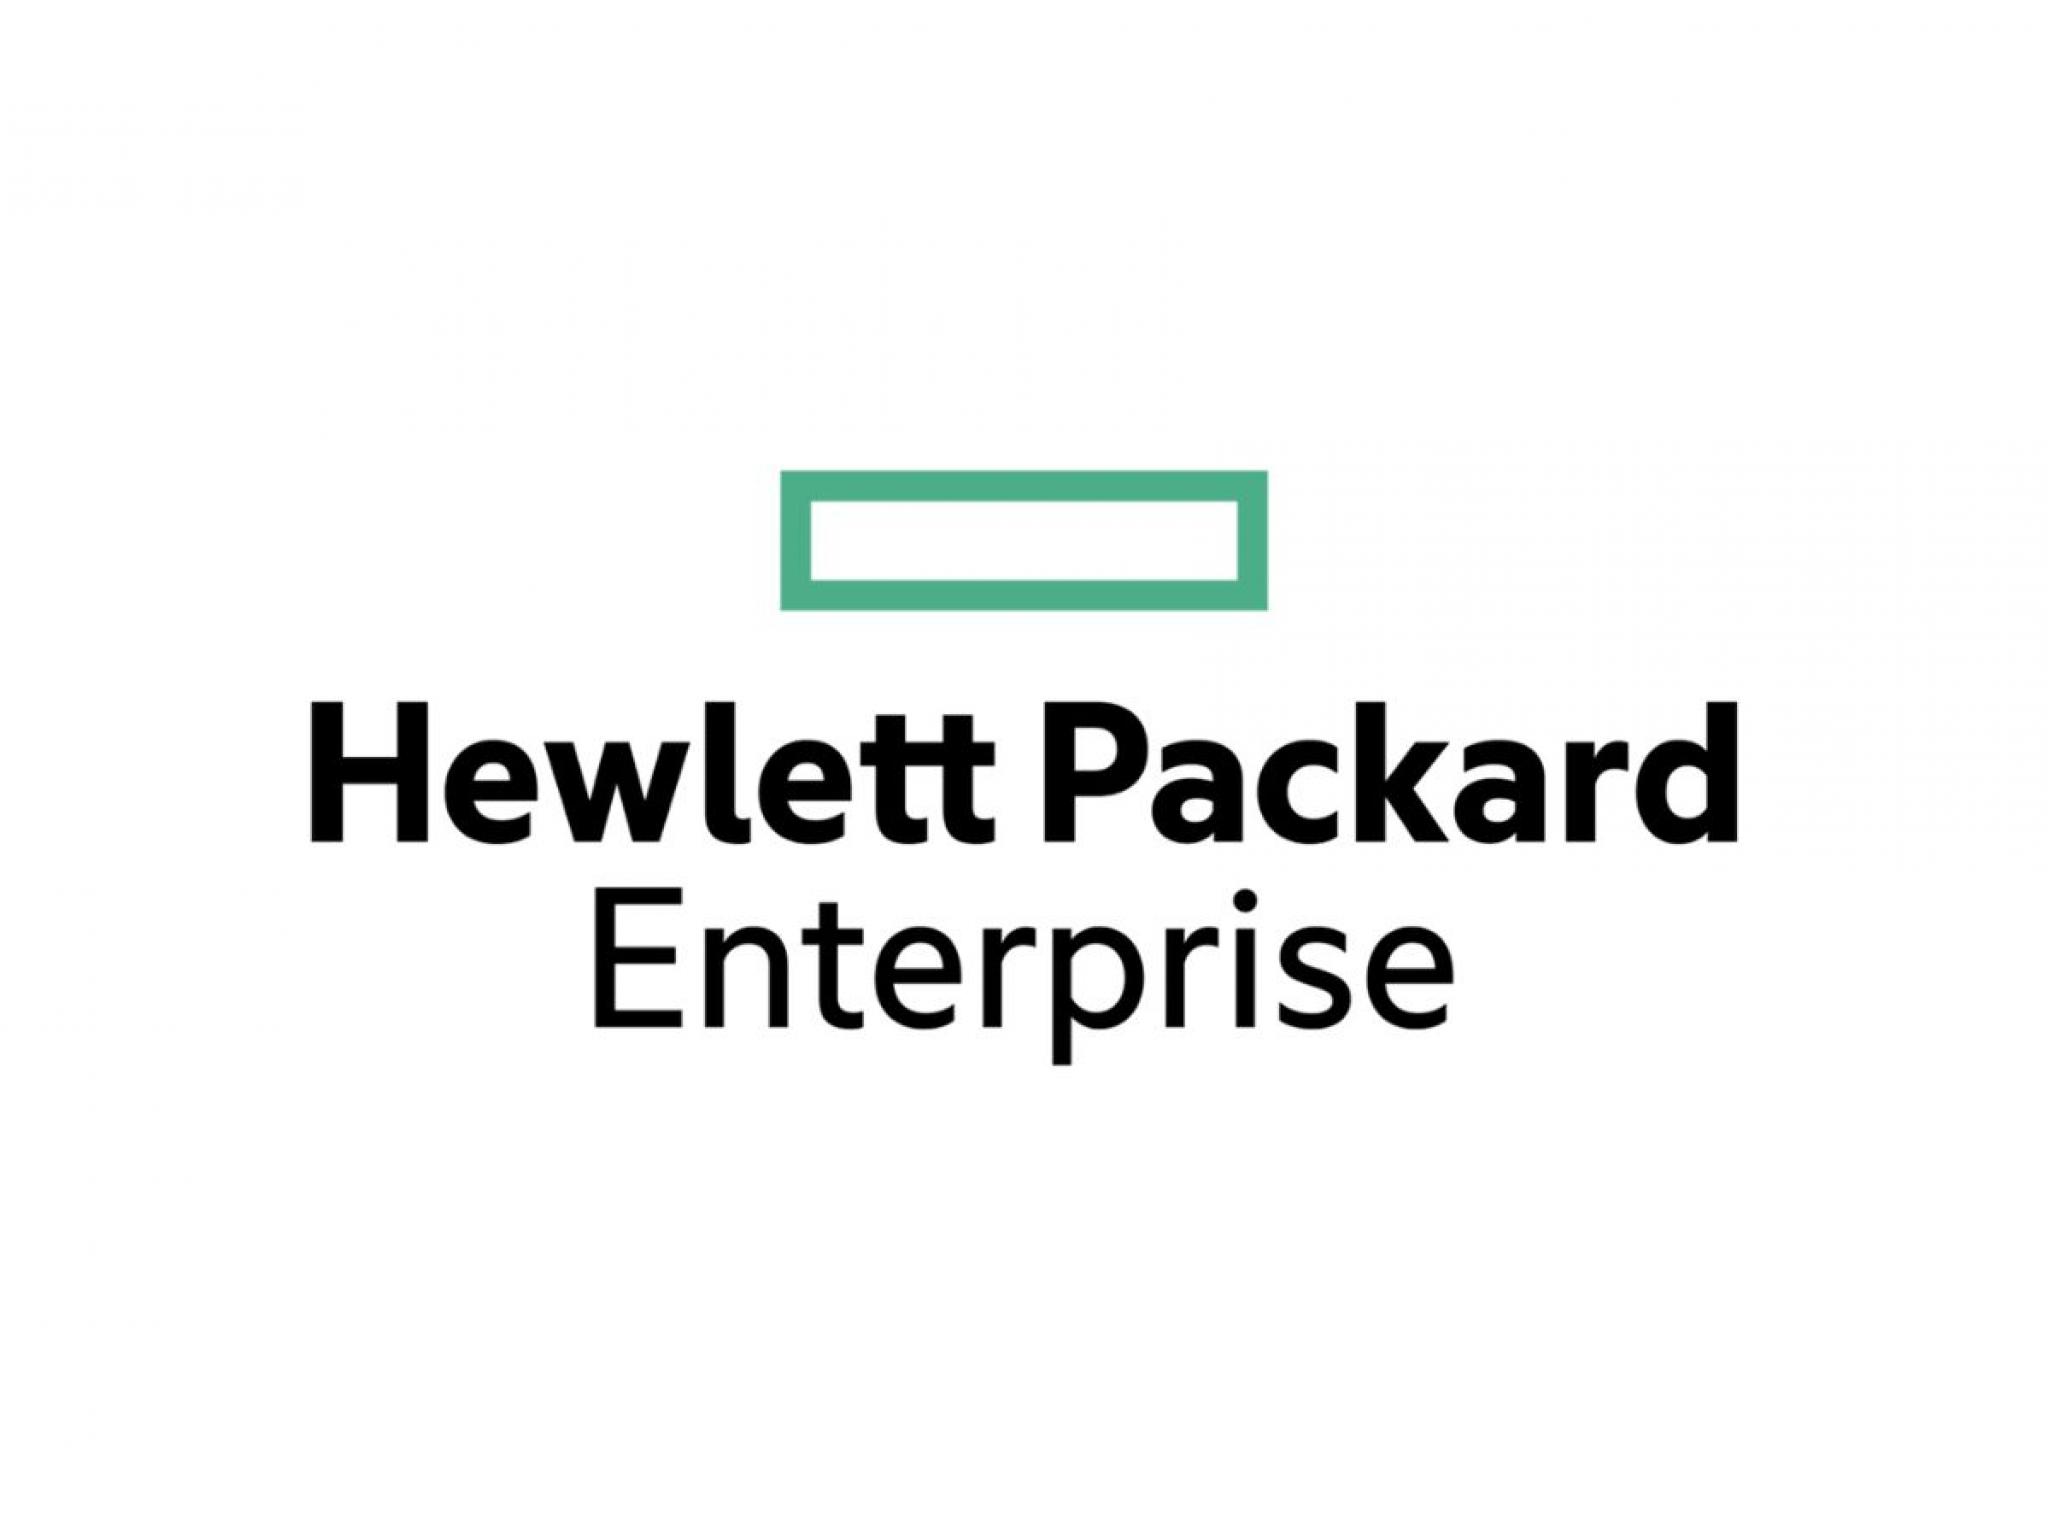  hewlett-packard-enterprise-posts-mixed-q1-results-joins-fisker-plug-power-and-other-big-stocks-moving-lower-in-fridays-pre-market-session 